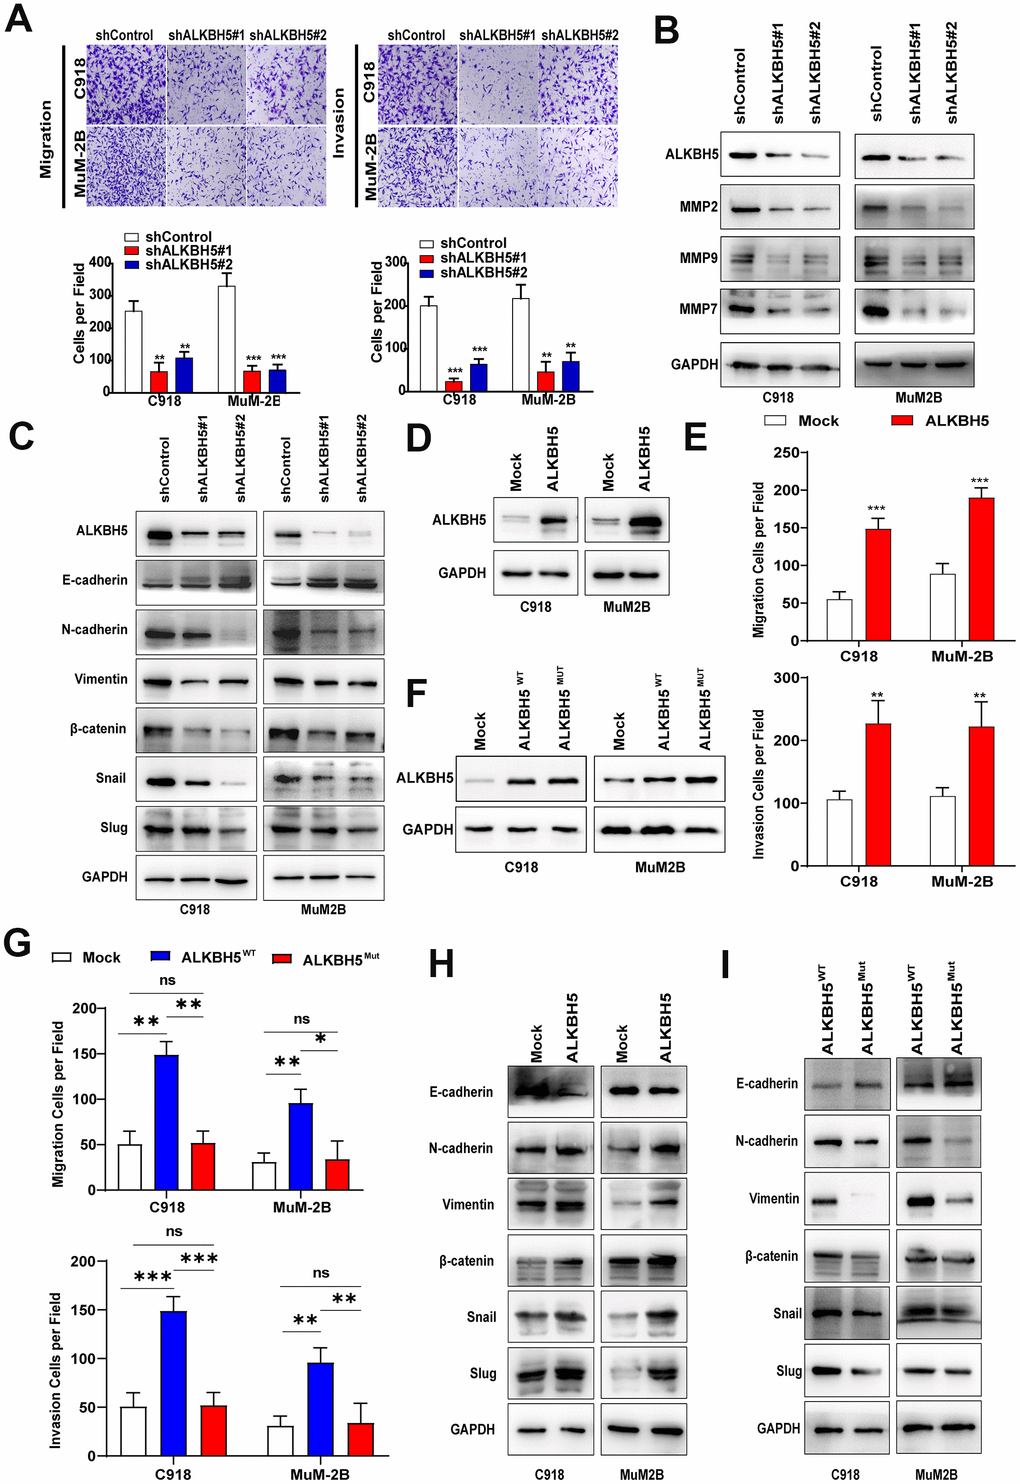 ALKBH5 promoted UM cell migration, invasion, and EMT. (A) After ALKBH5 knockdown plasmid transfection for 24 hours, the transwell migration assay and Matrigel invasion assay were used to determine cell migration and invasion ability, respectively, in C918 and MuM-2B cells. (B) After transfection with shRNA-targeted ALKBH5, the expression of MMP2, MMP7, and MMP9 was detected using western blot. (C) Knockdown of ALKBH5 decreased mesenchymal markers (N-cadherin, vimentin, Snail, Slug, and β-catenin) and increased epithelial marker (E-cadherin) in UM cells. (D) The ALKBH5 overexpression efficiency was verified at the protein level in UM cells by western blot assay. (E) Upregulation of ALKBH5 increased cell migration and invasion abilities in UM cells. (F) Western blot assay was used to detect the ALKBH5 protein level by transfecting UM cells with wild-type or catalytic inactive mutation plasmid of ALKBH5. (G) Compared with ALKBH5 wild-type plasmid transfection, catalytic inactive mutation of ALKBH5 decreased the migration and invasion of UM cells. (H) Overexpression of ALKBH5 increased the expression of EMT markers. (I) Loss of ALKBH5 catalytic activity suppressed the expression of EMT-related proteins in UM cells. Mean ± SEM, t-test, *P P P 